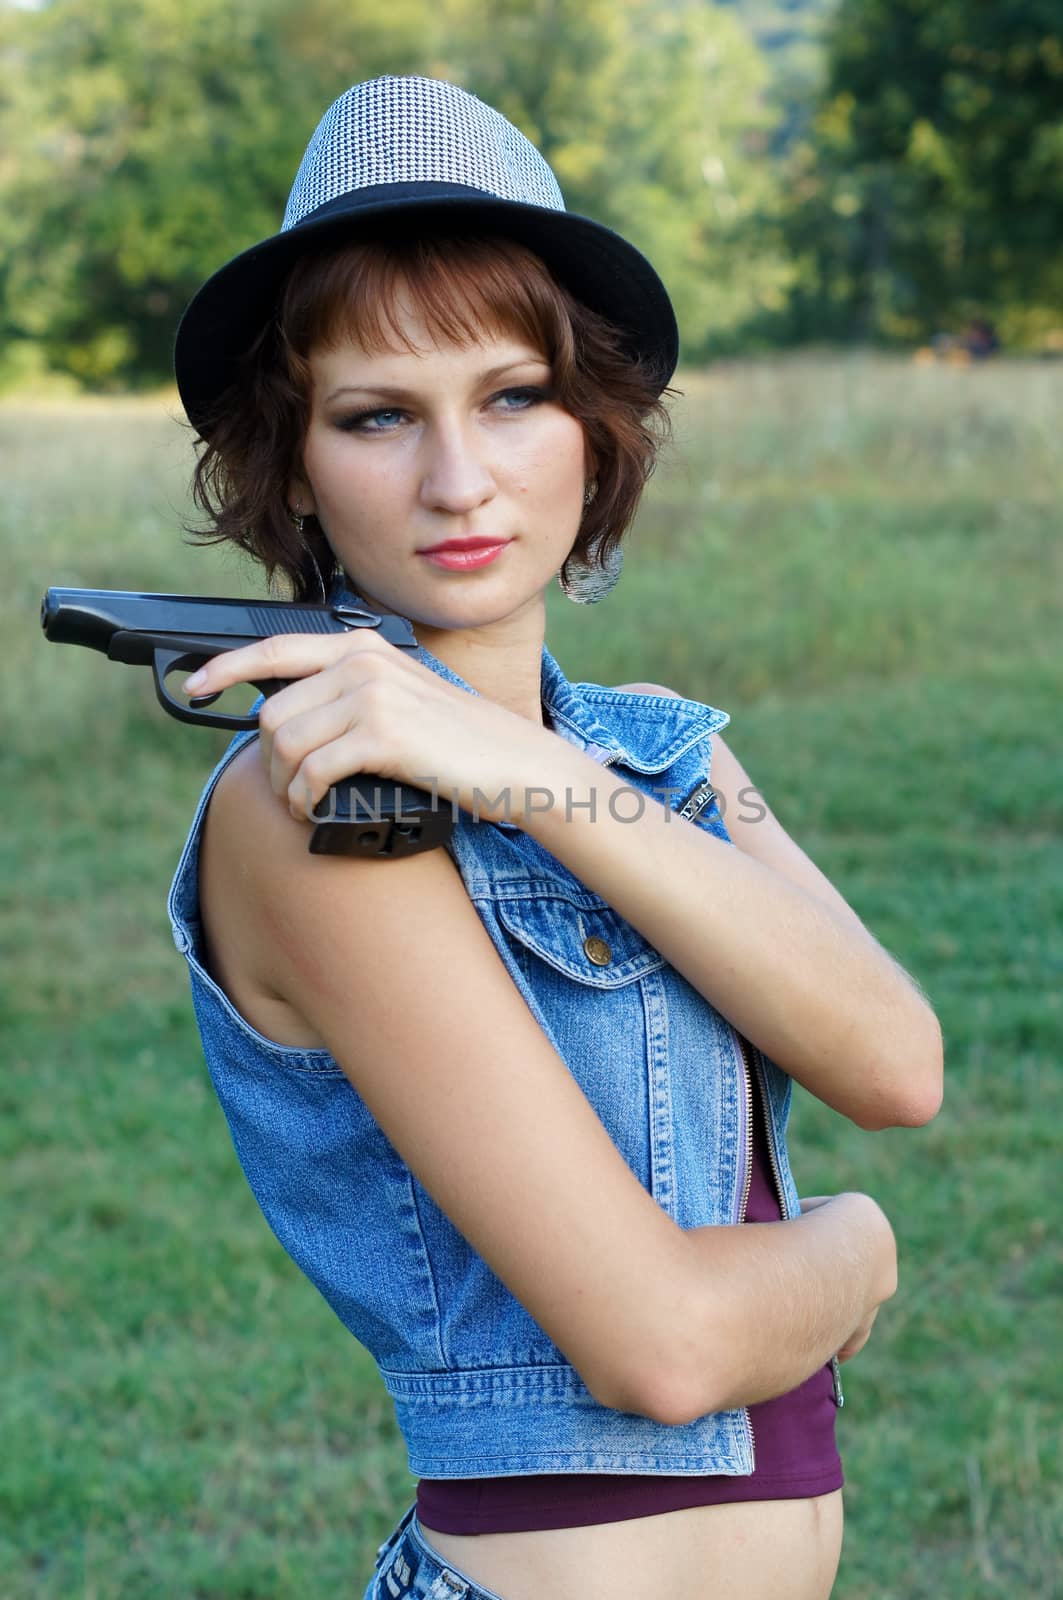 The girl with a pistol